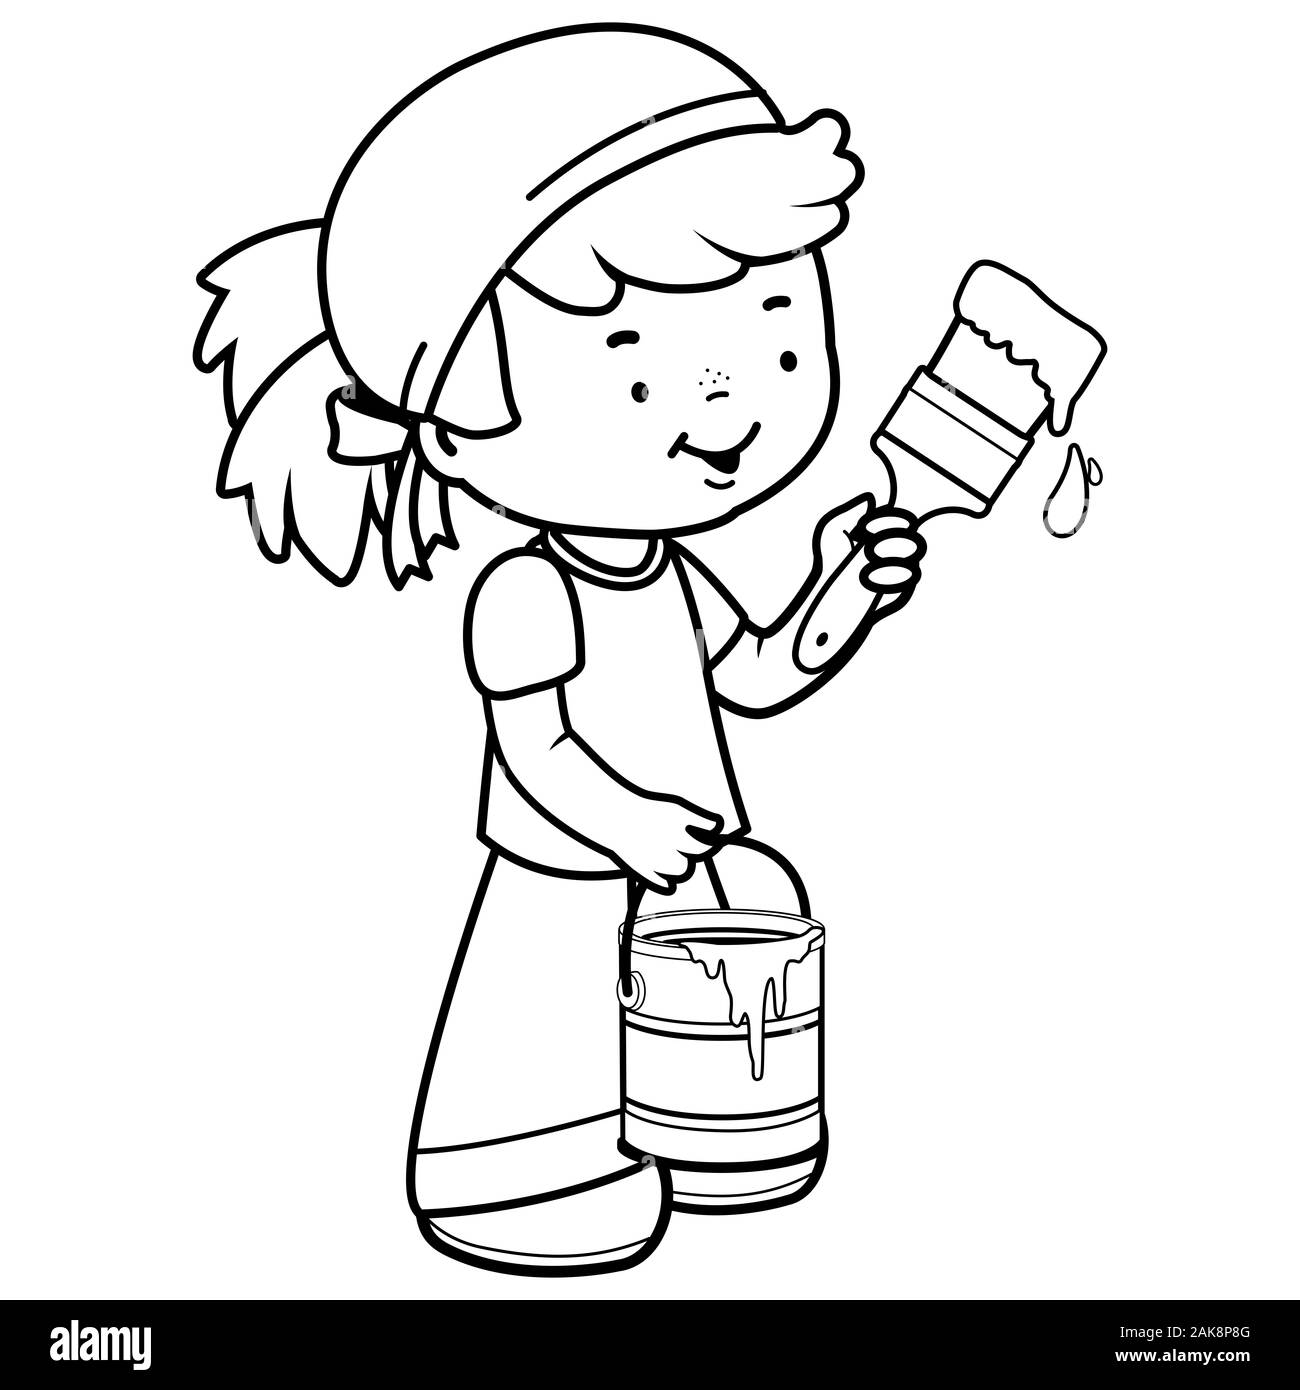 Girl painting with a paint brush and holding a paint bucket. Black and white coloring page. Stock Photo